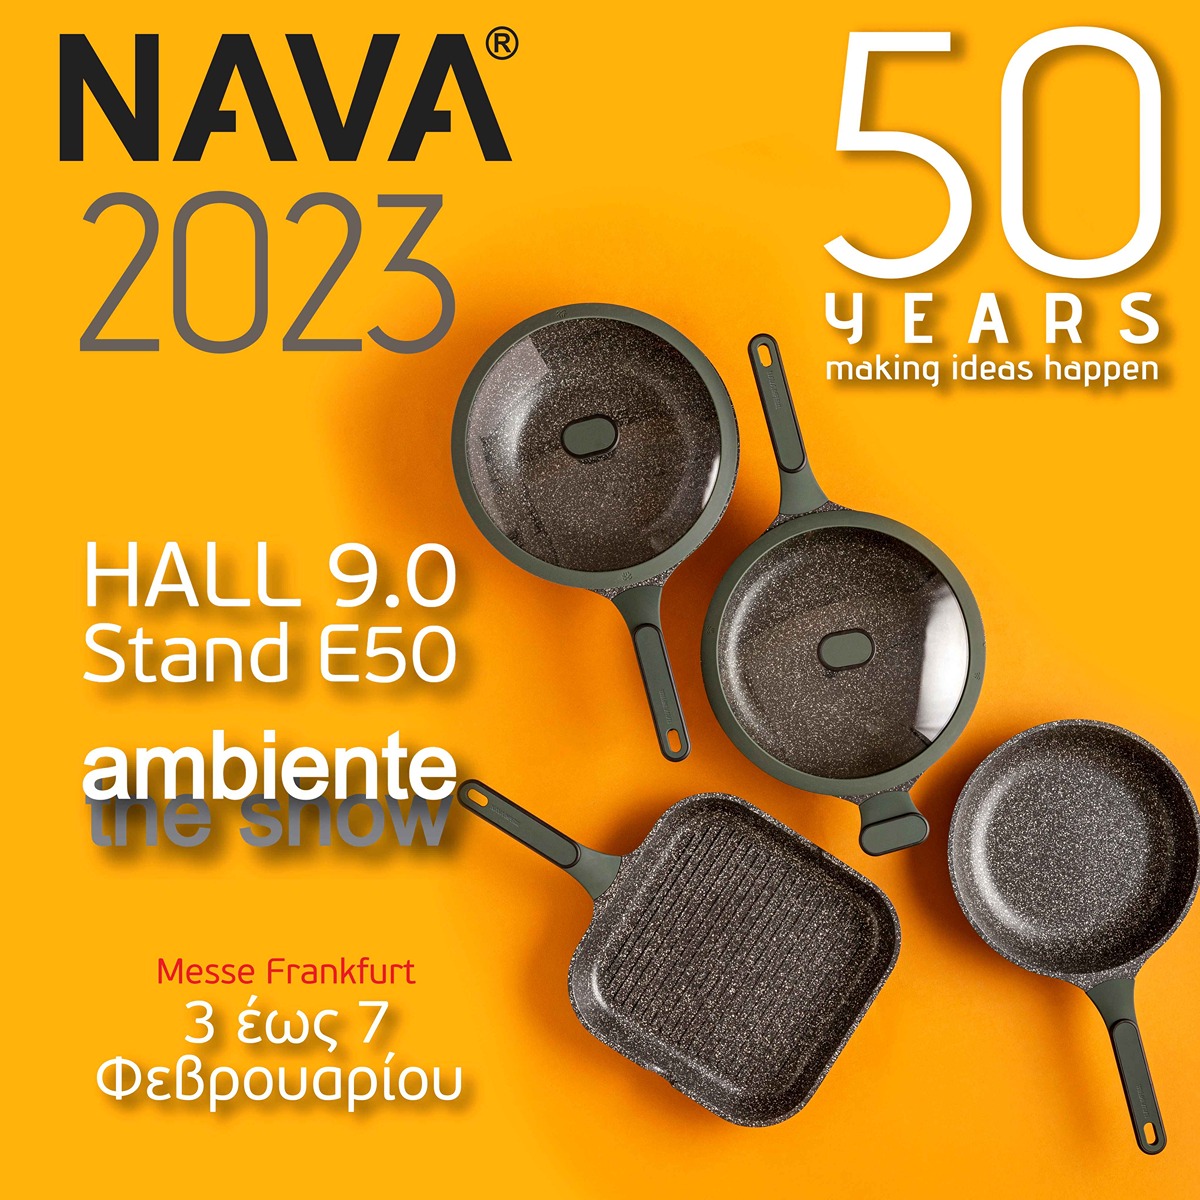 For the 9th year, NAVA participates in the world exhibition AMBIENTE 2023